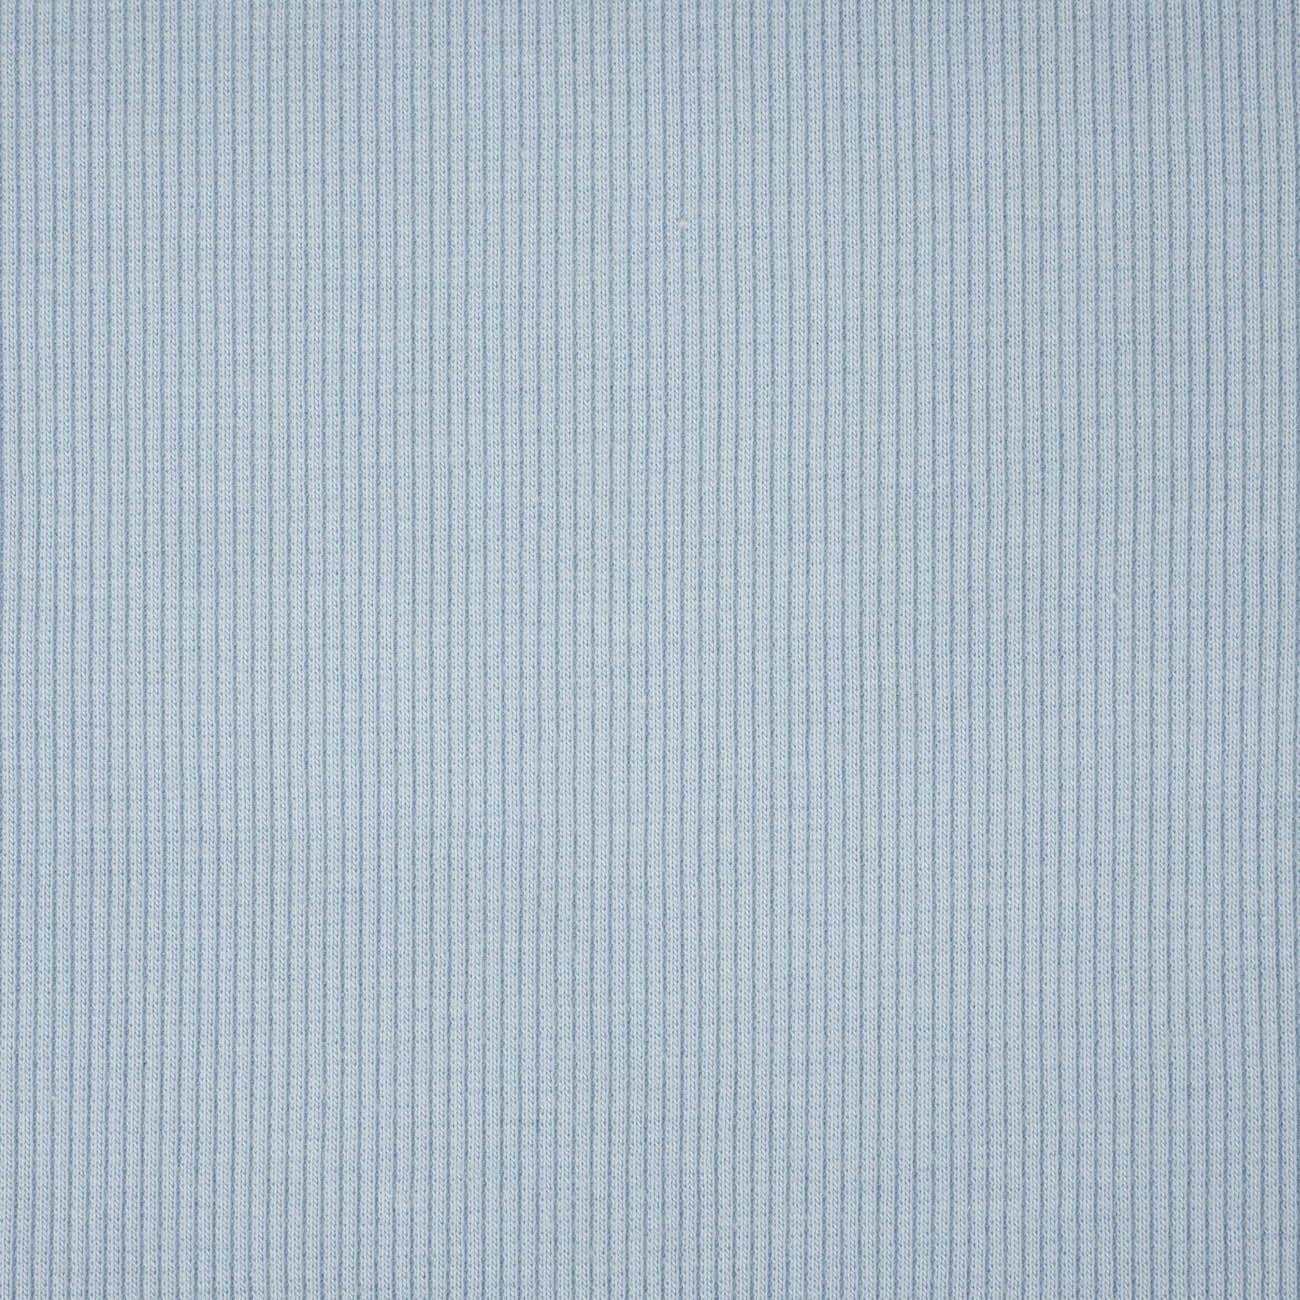 D-75 LIGHT BLUE - Ribbed knit fabric